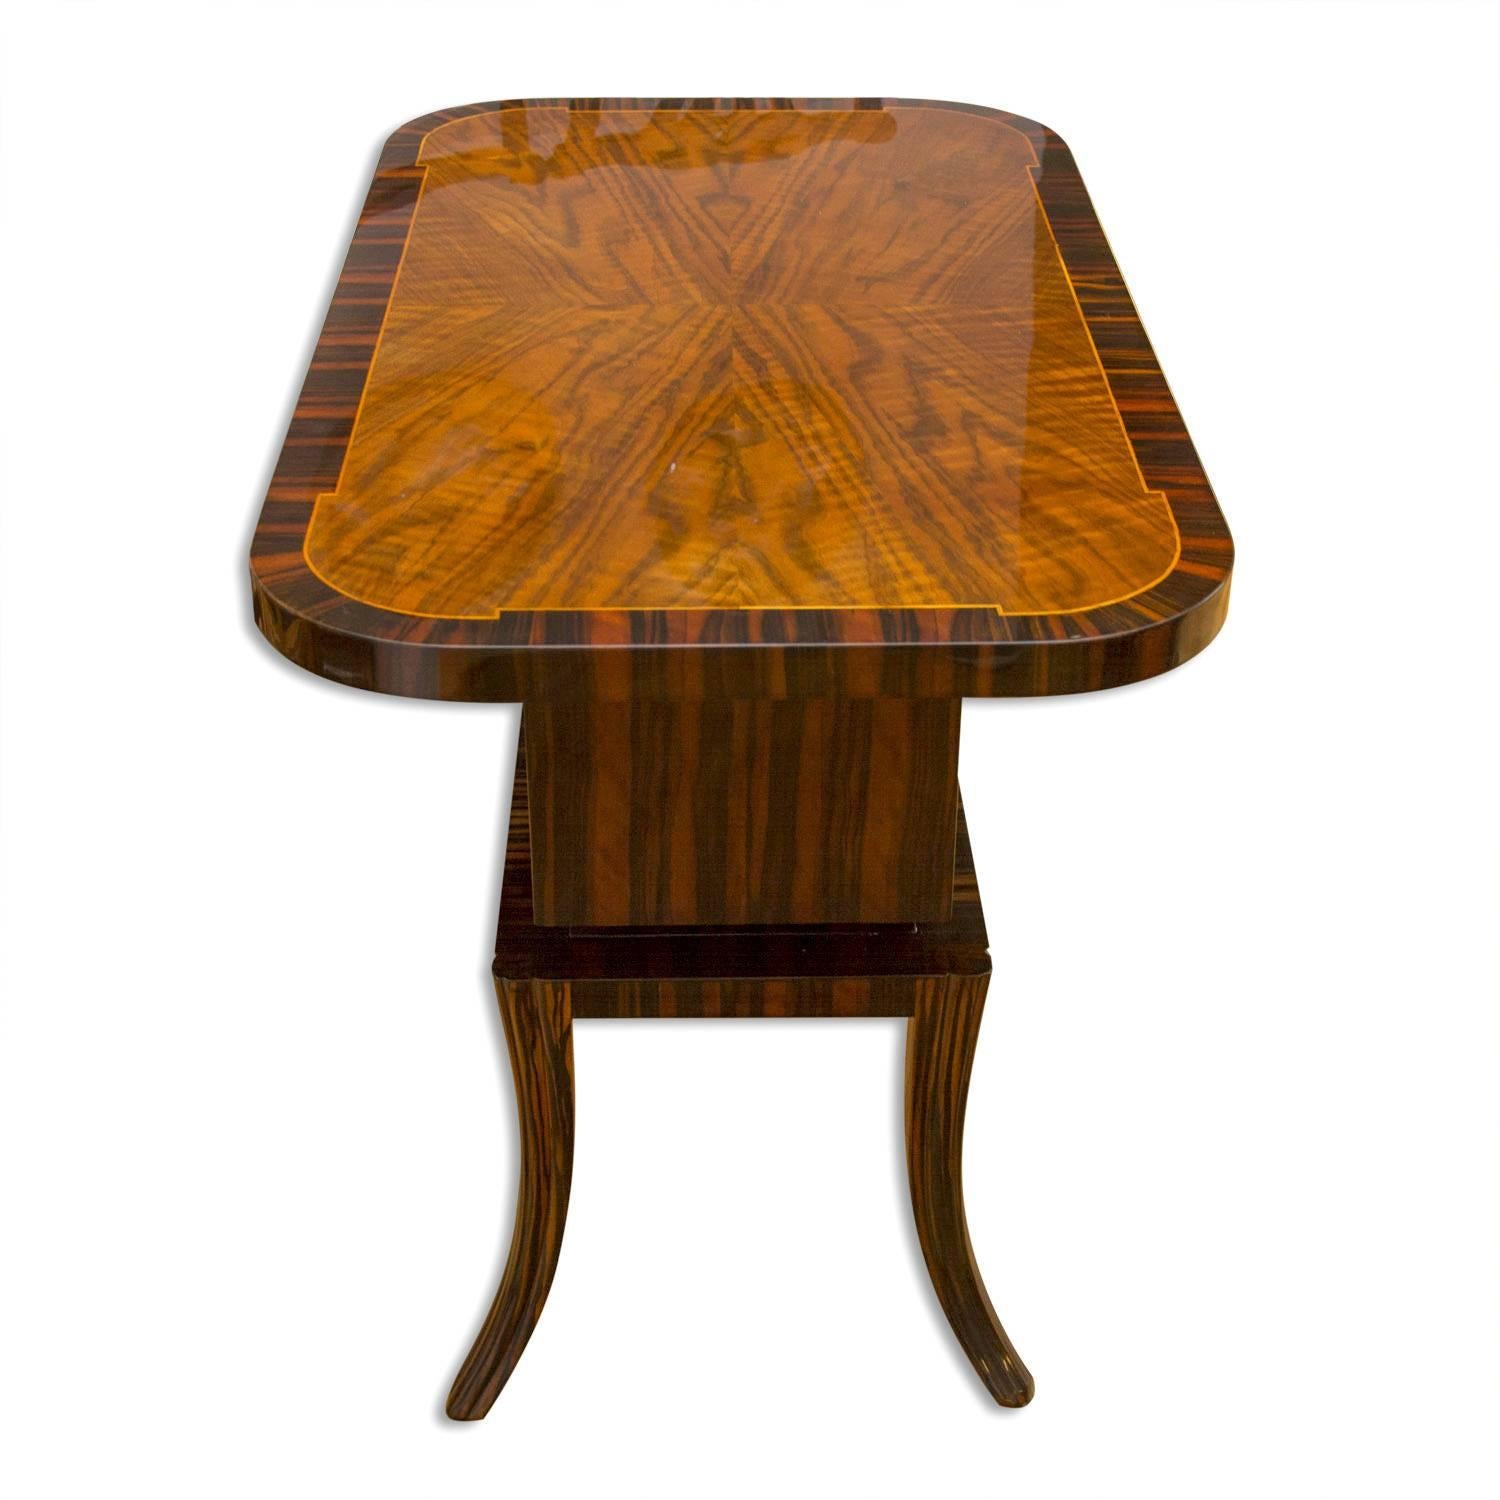 1930s coffee table